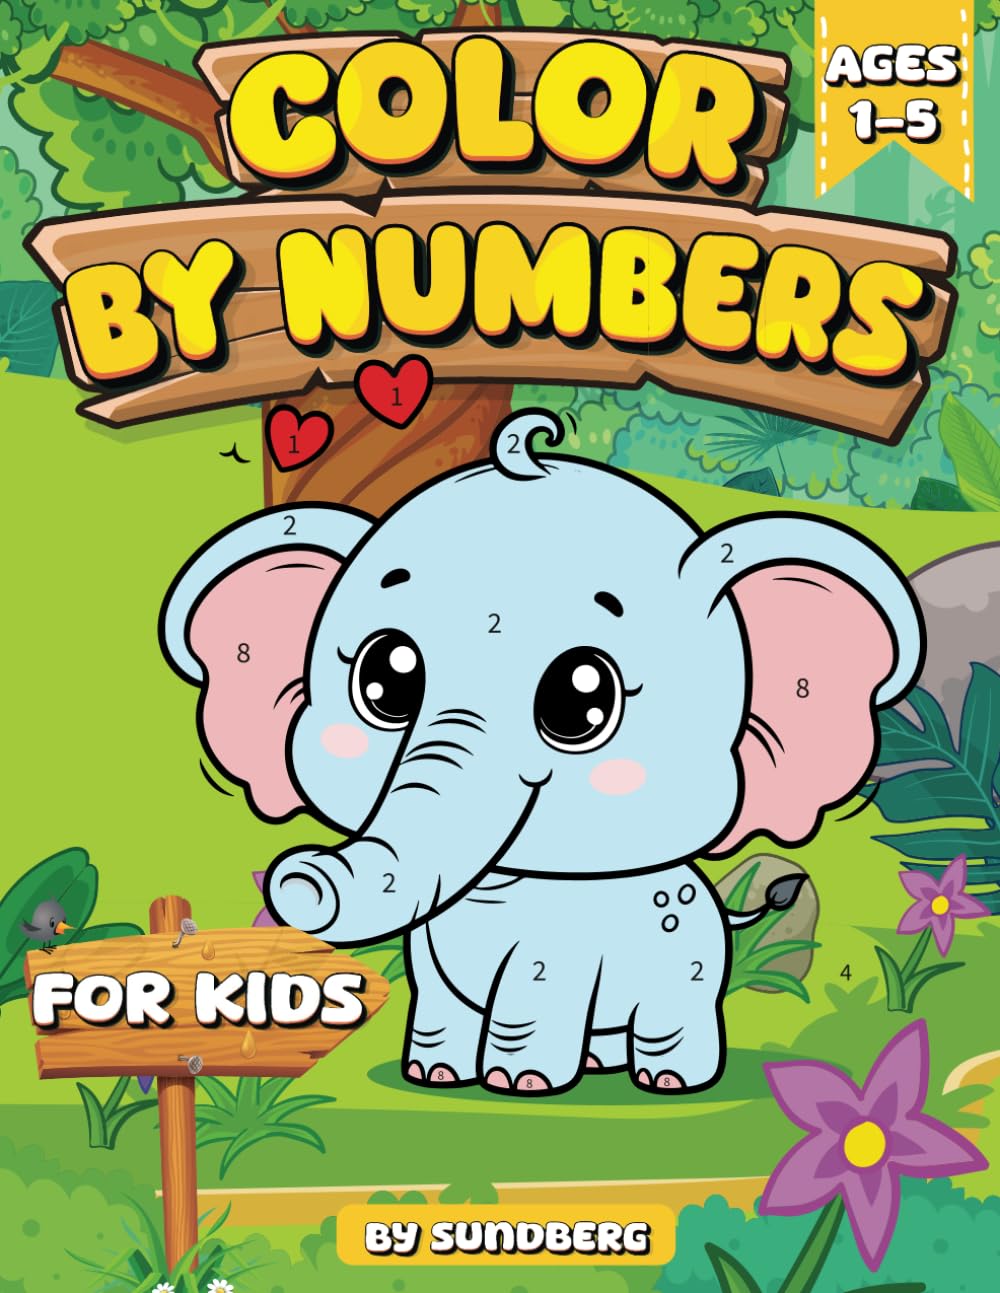 Color by Number for Kids Ages 1-5: By Sundberg